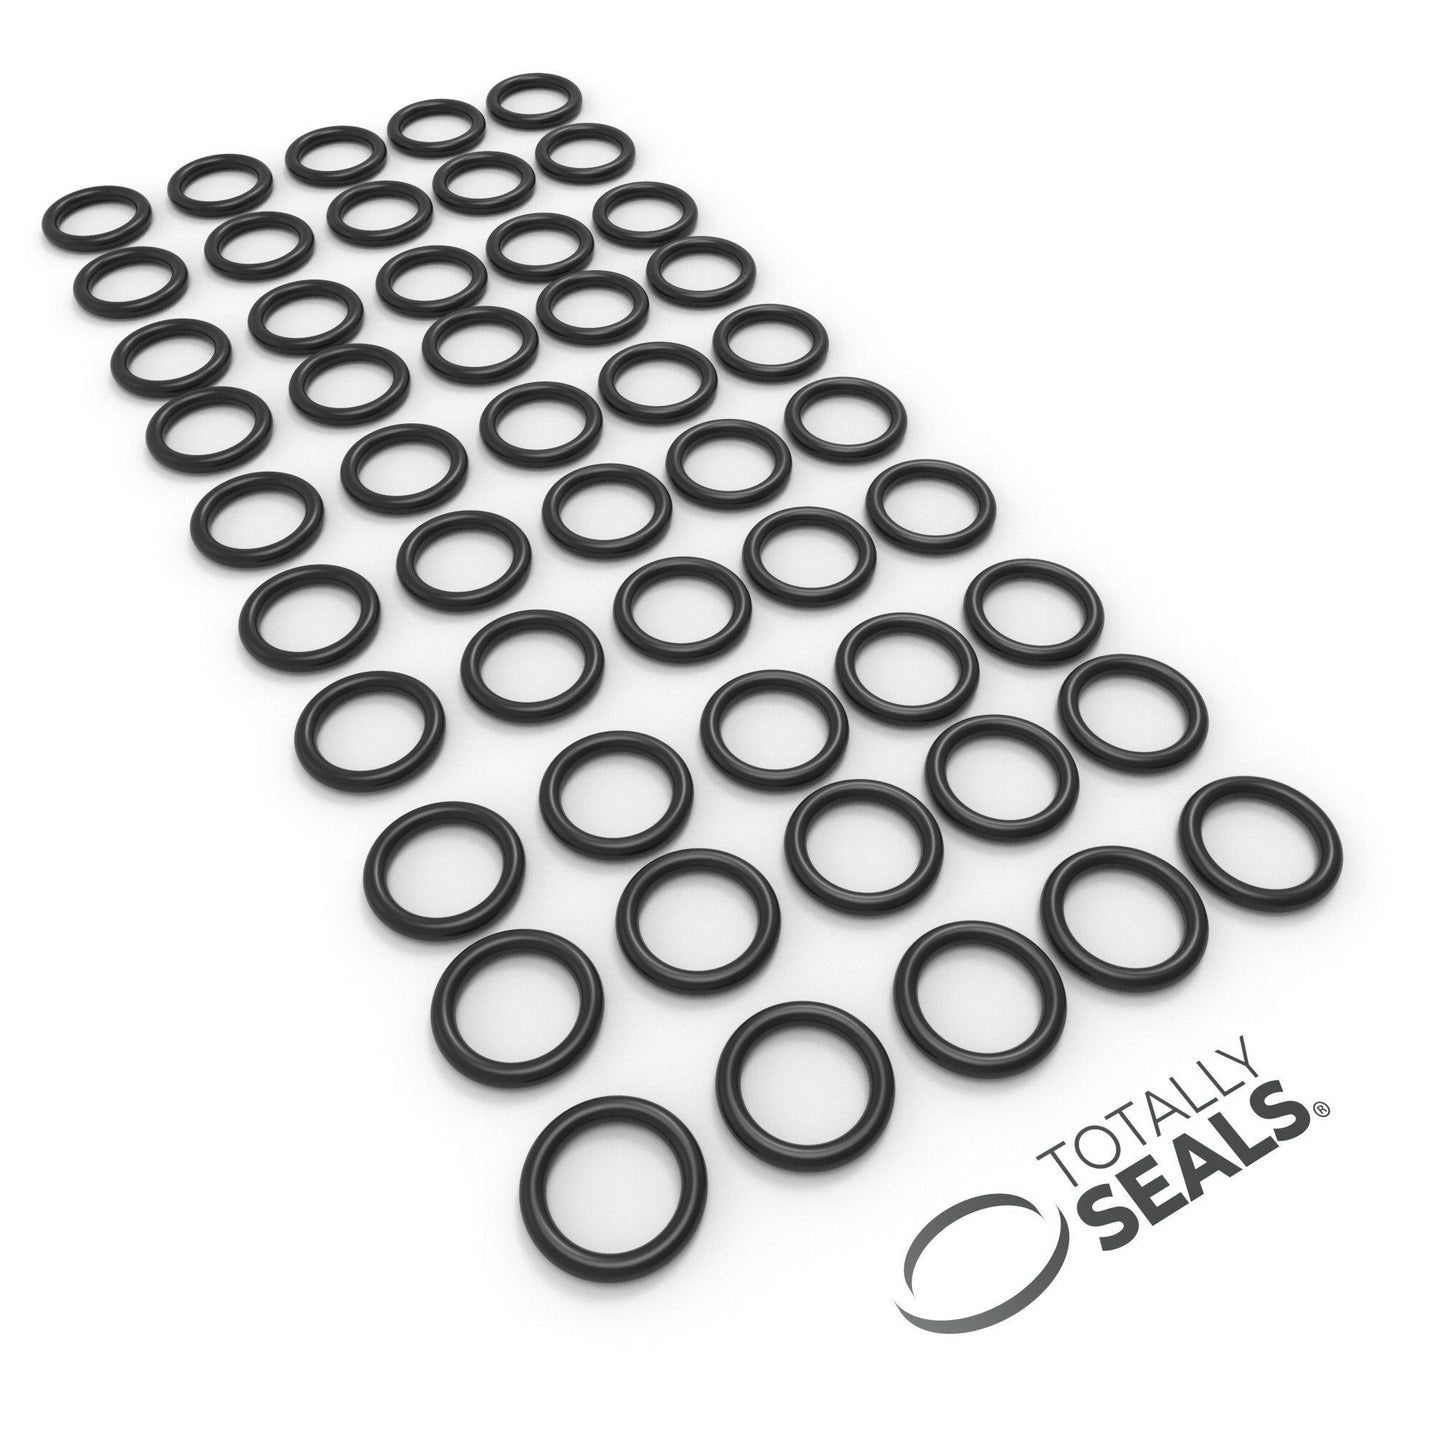 7mm x 1.5mm (10mm OD) Nitrile O-Rings - Totally Seals®